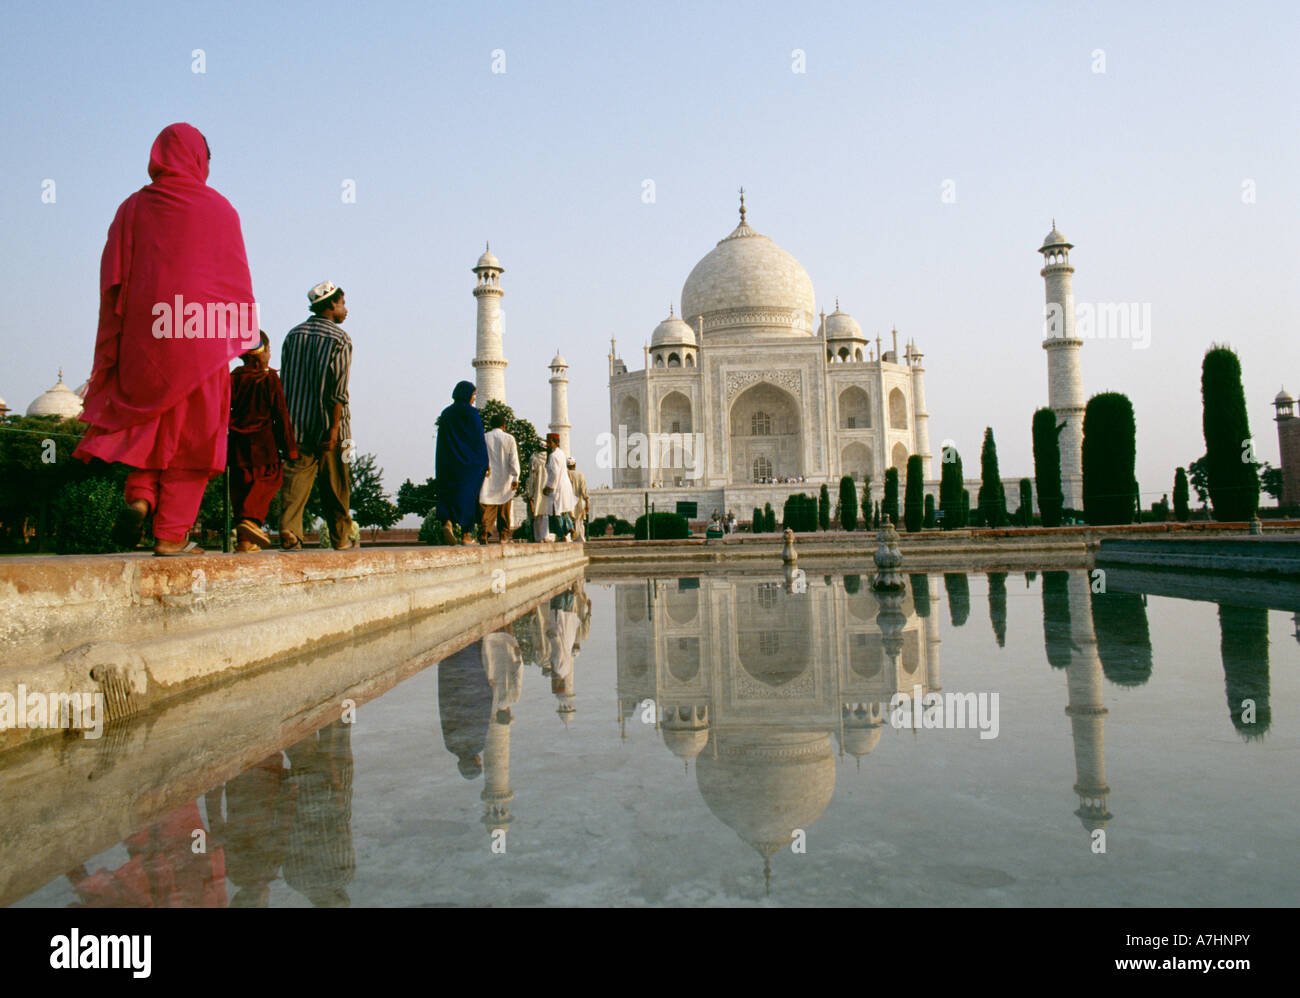 Worshippers walking towards the Taj Mahal one of the most famous landmarks in India and around the world Stock Photo